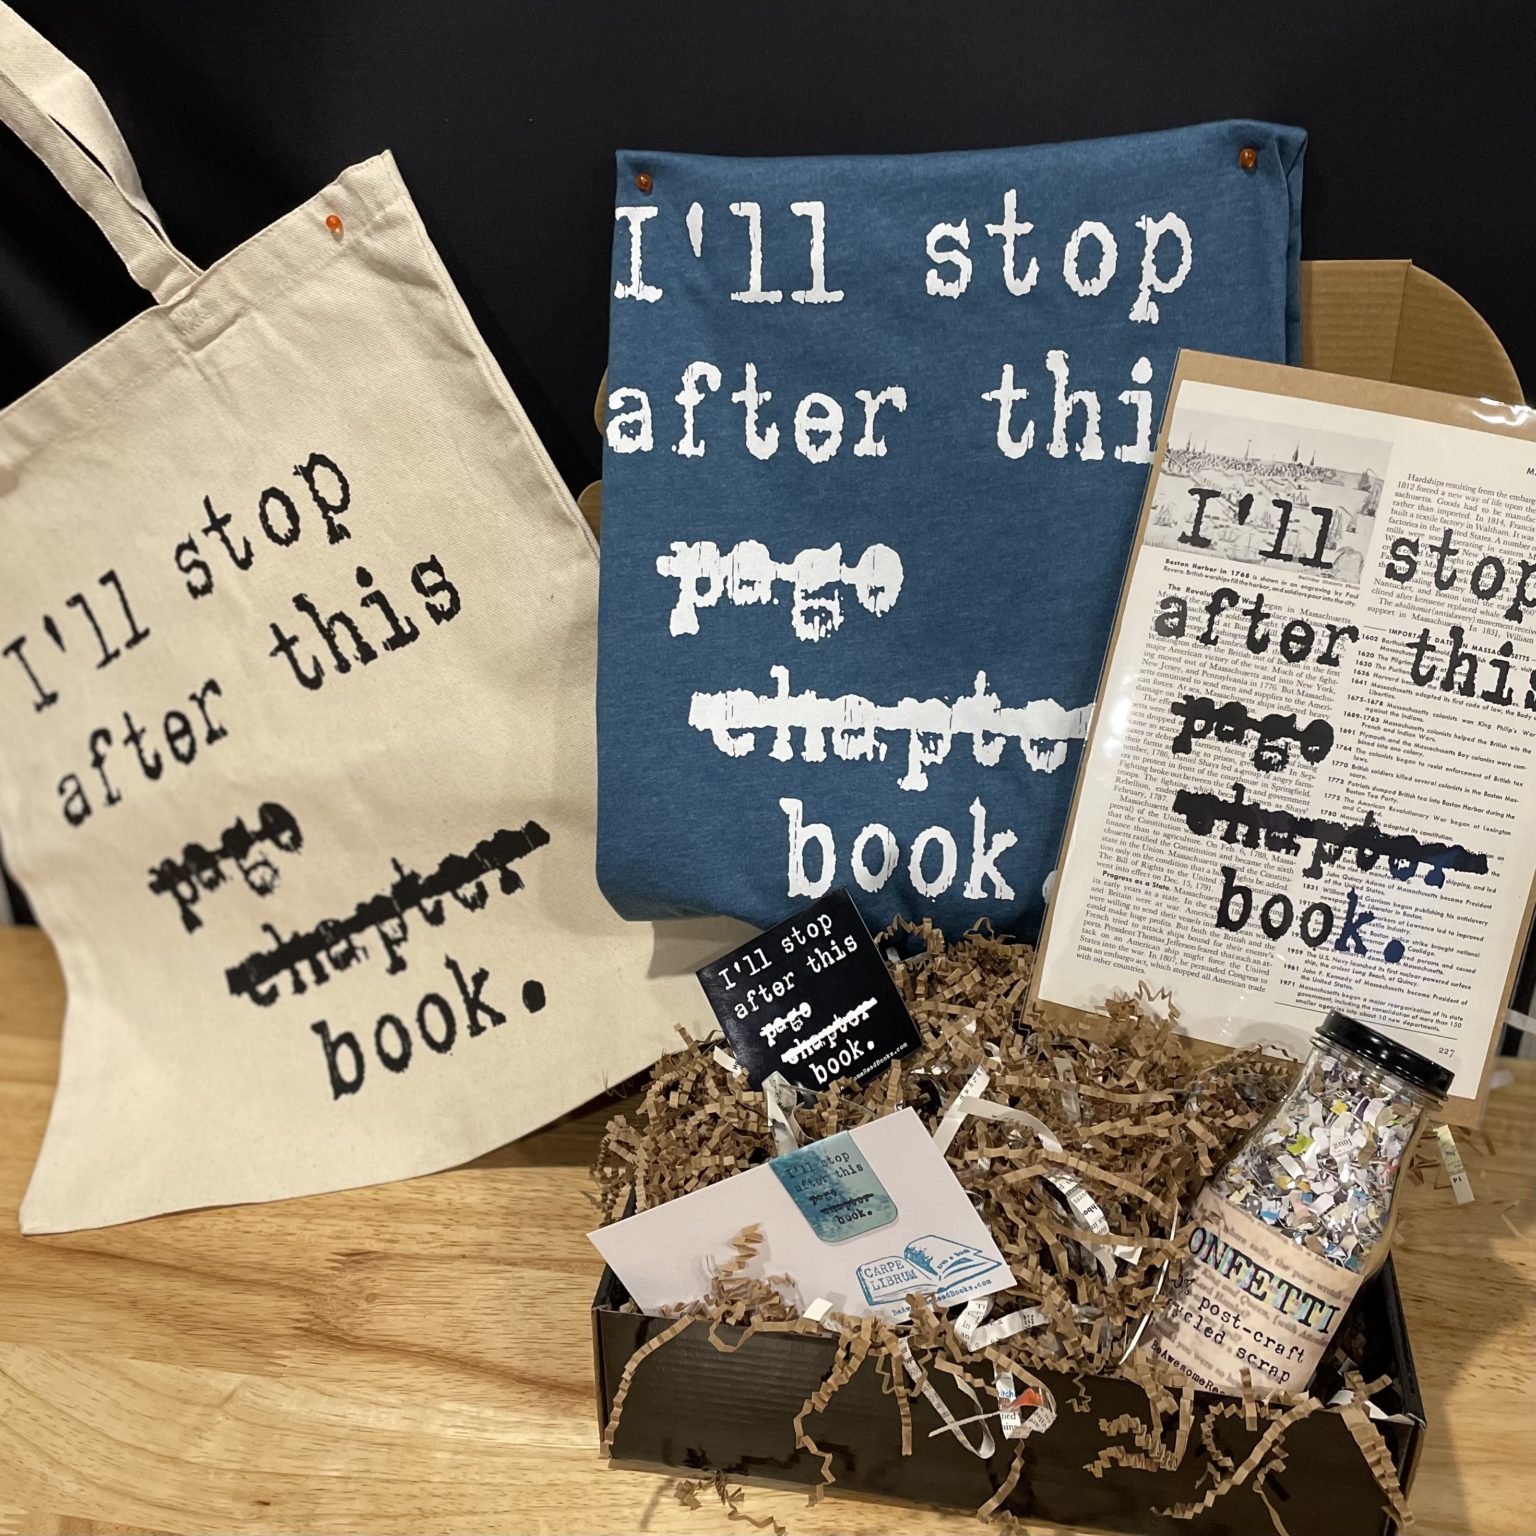 A display of Elizabeth's products include a tote bag, a tshirt, and a poster, all with the phrase, "I'll stop after this page, chapter, book," written on them. There are also bookmarks and a jar of recycled book confetti.